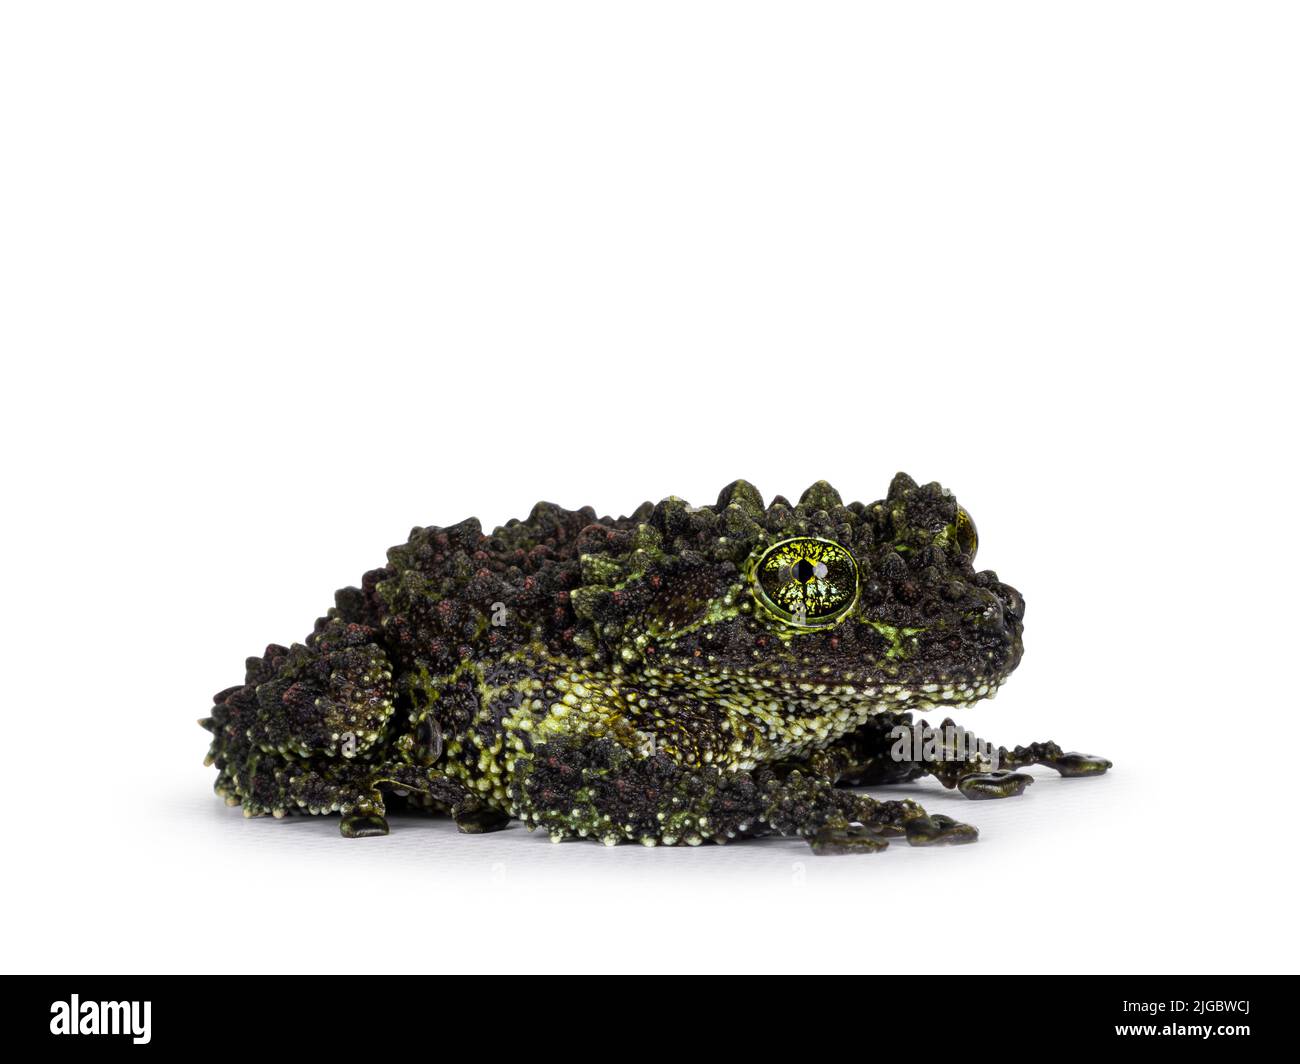 Mossy frog aka Theloderma corticale, sitting side ways. Isolated on a white background. Stock Photo